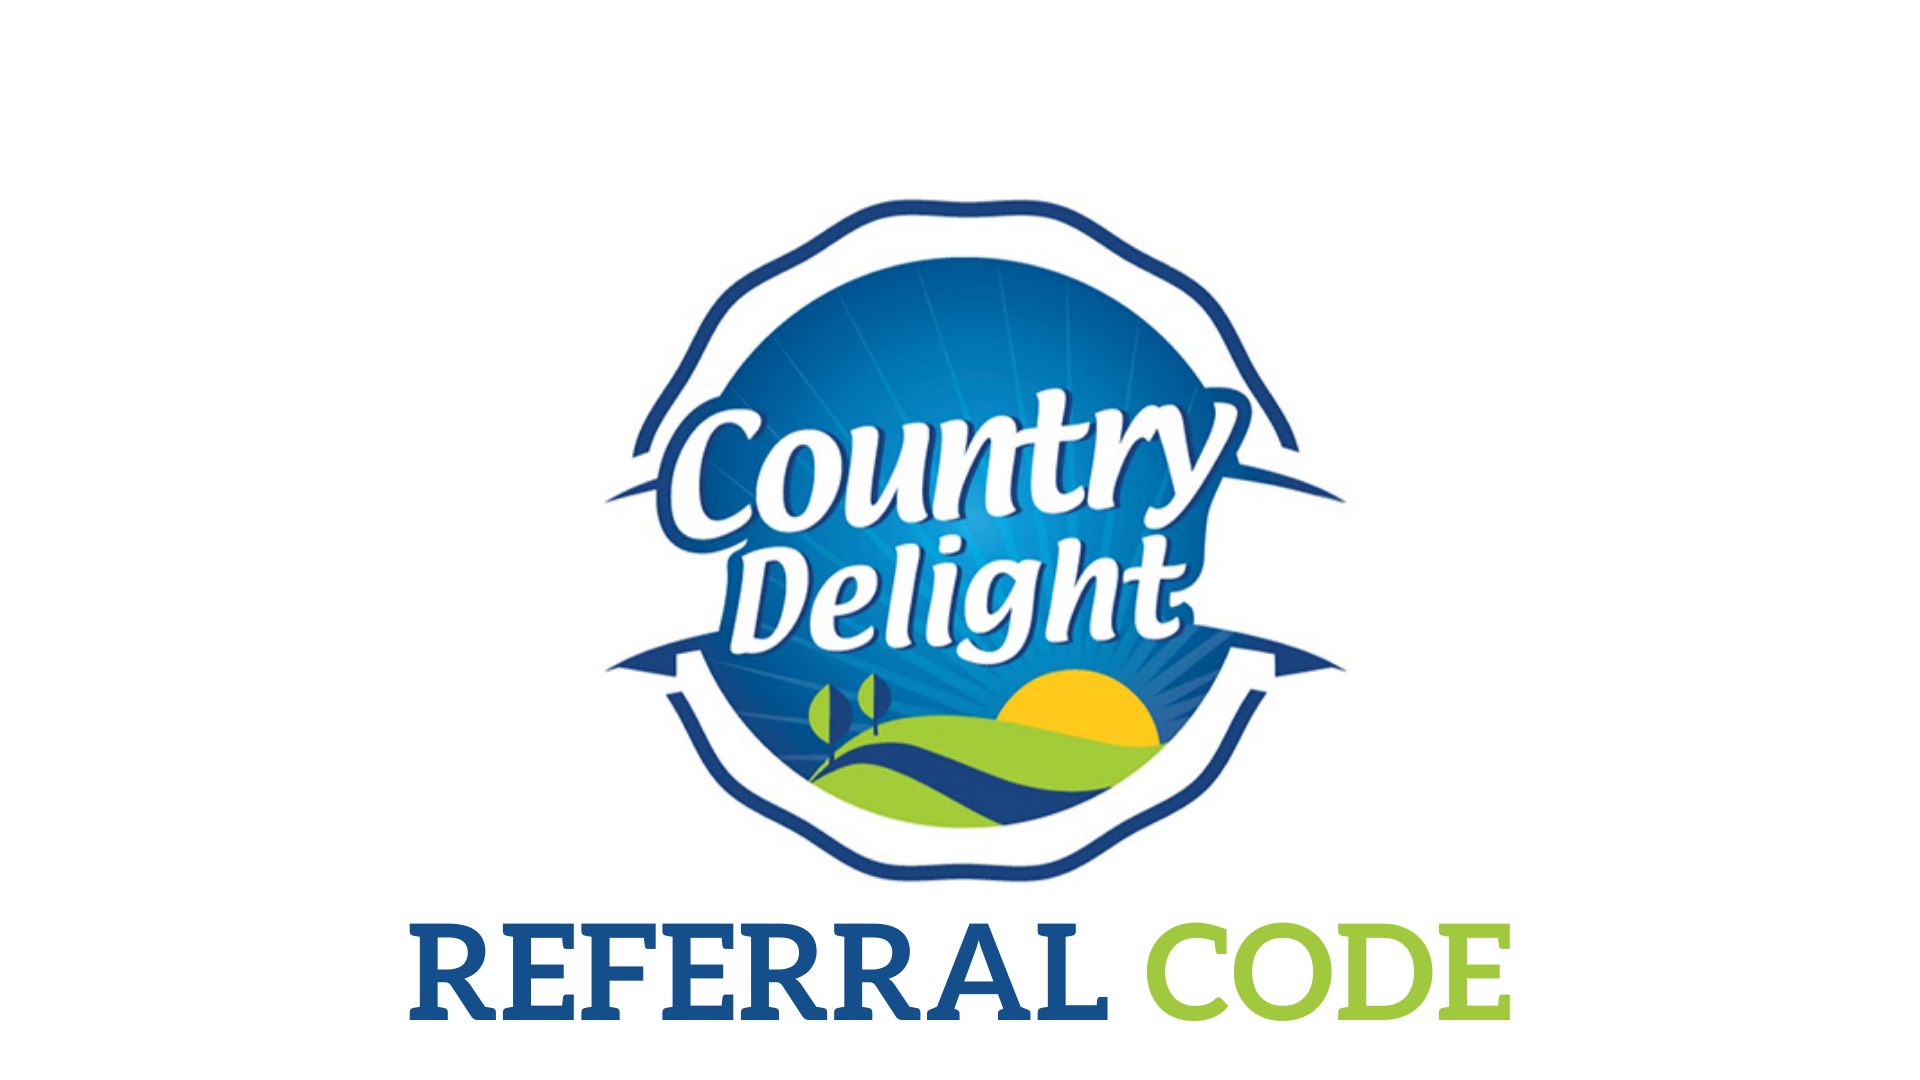 Country Delight Referral Code 2022 - Get Up To Rs.150 Cashback